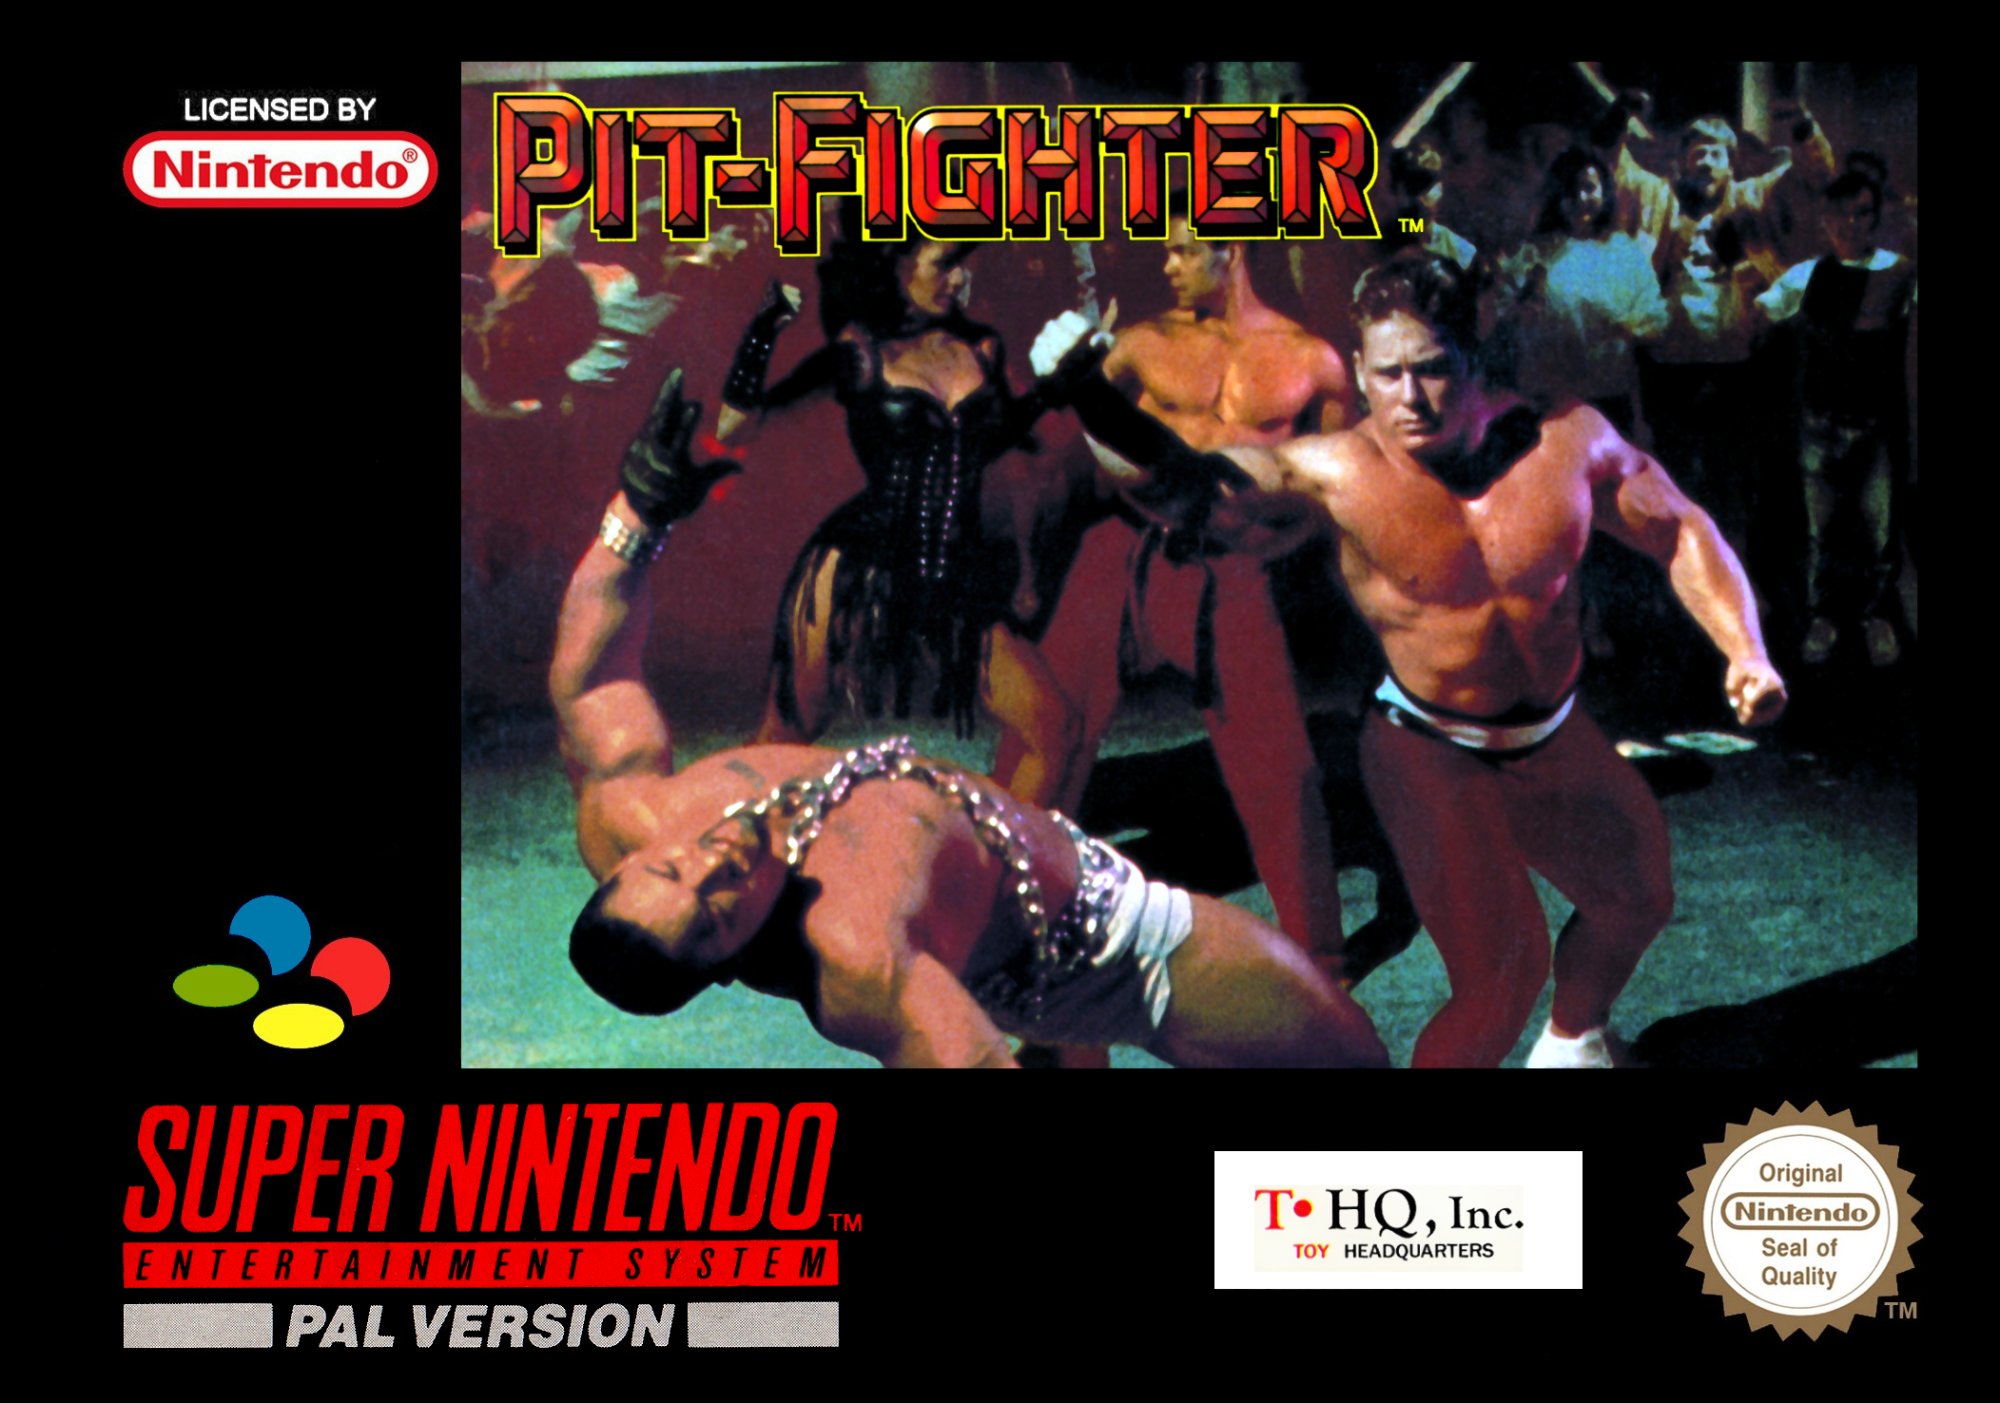 Pit-Fighter